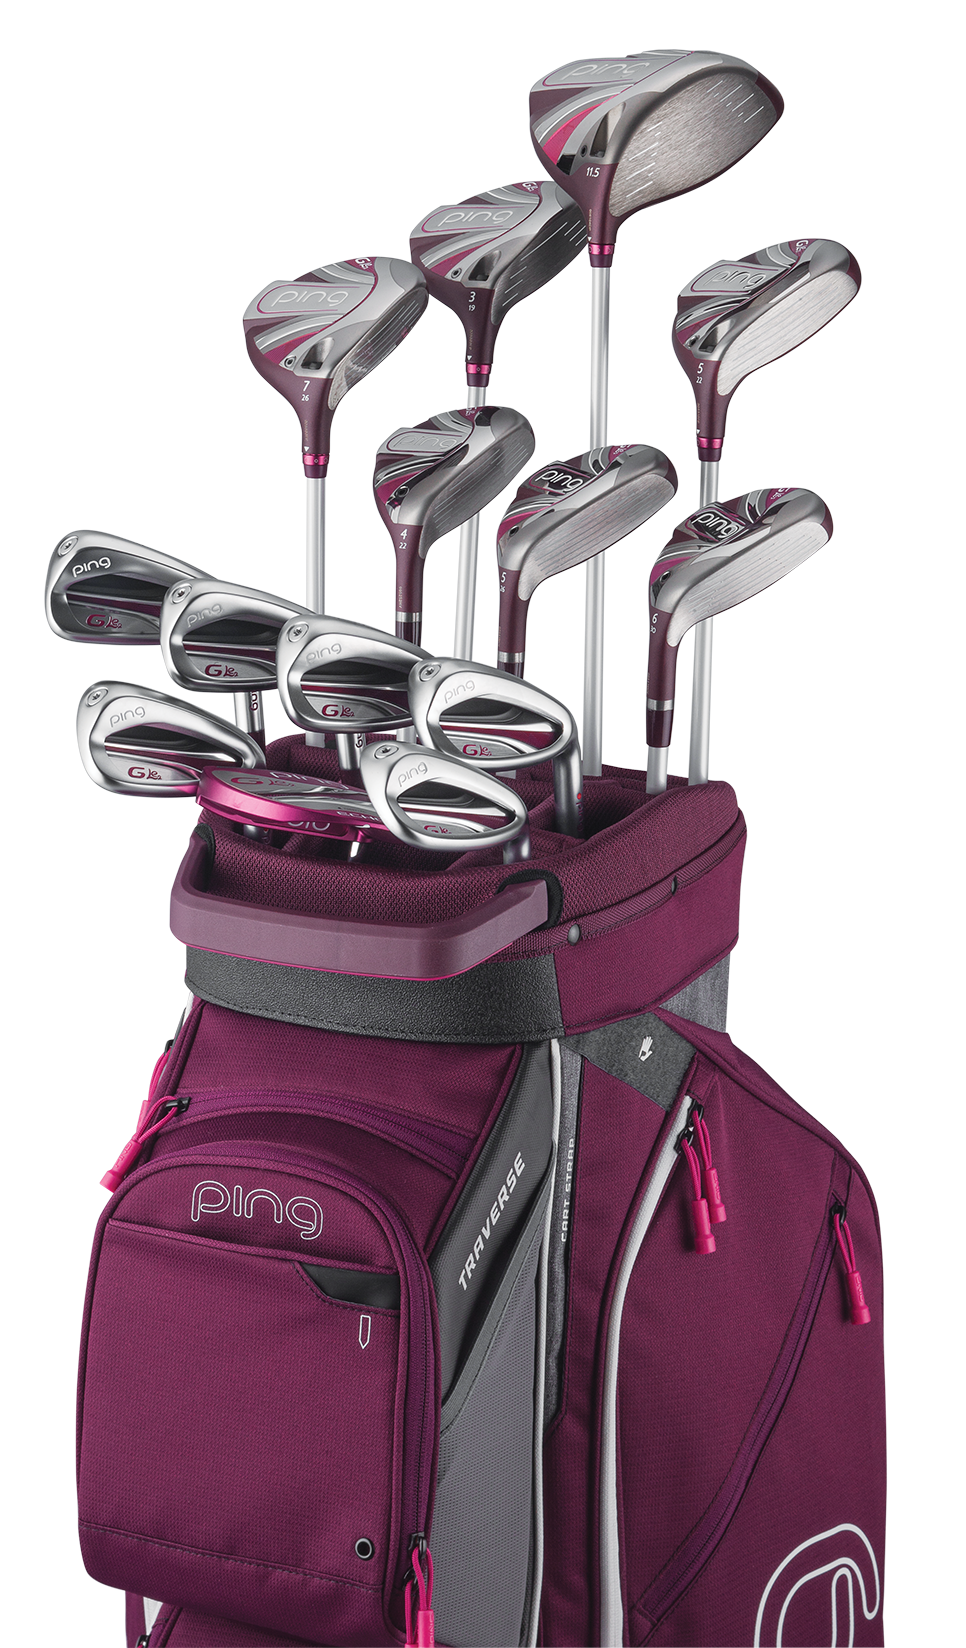 Ping intros next gen ladies golf equipment with new G Le2 - The 